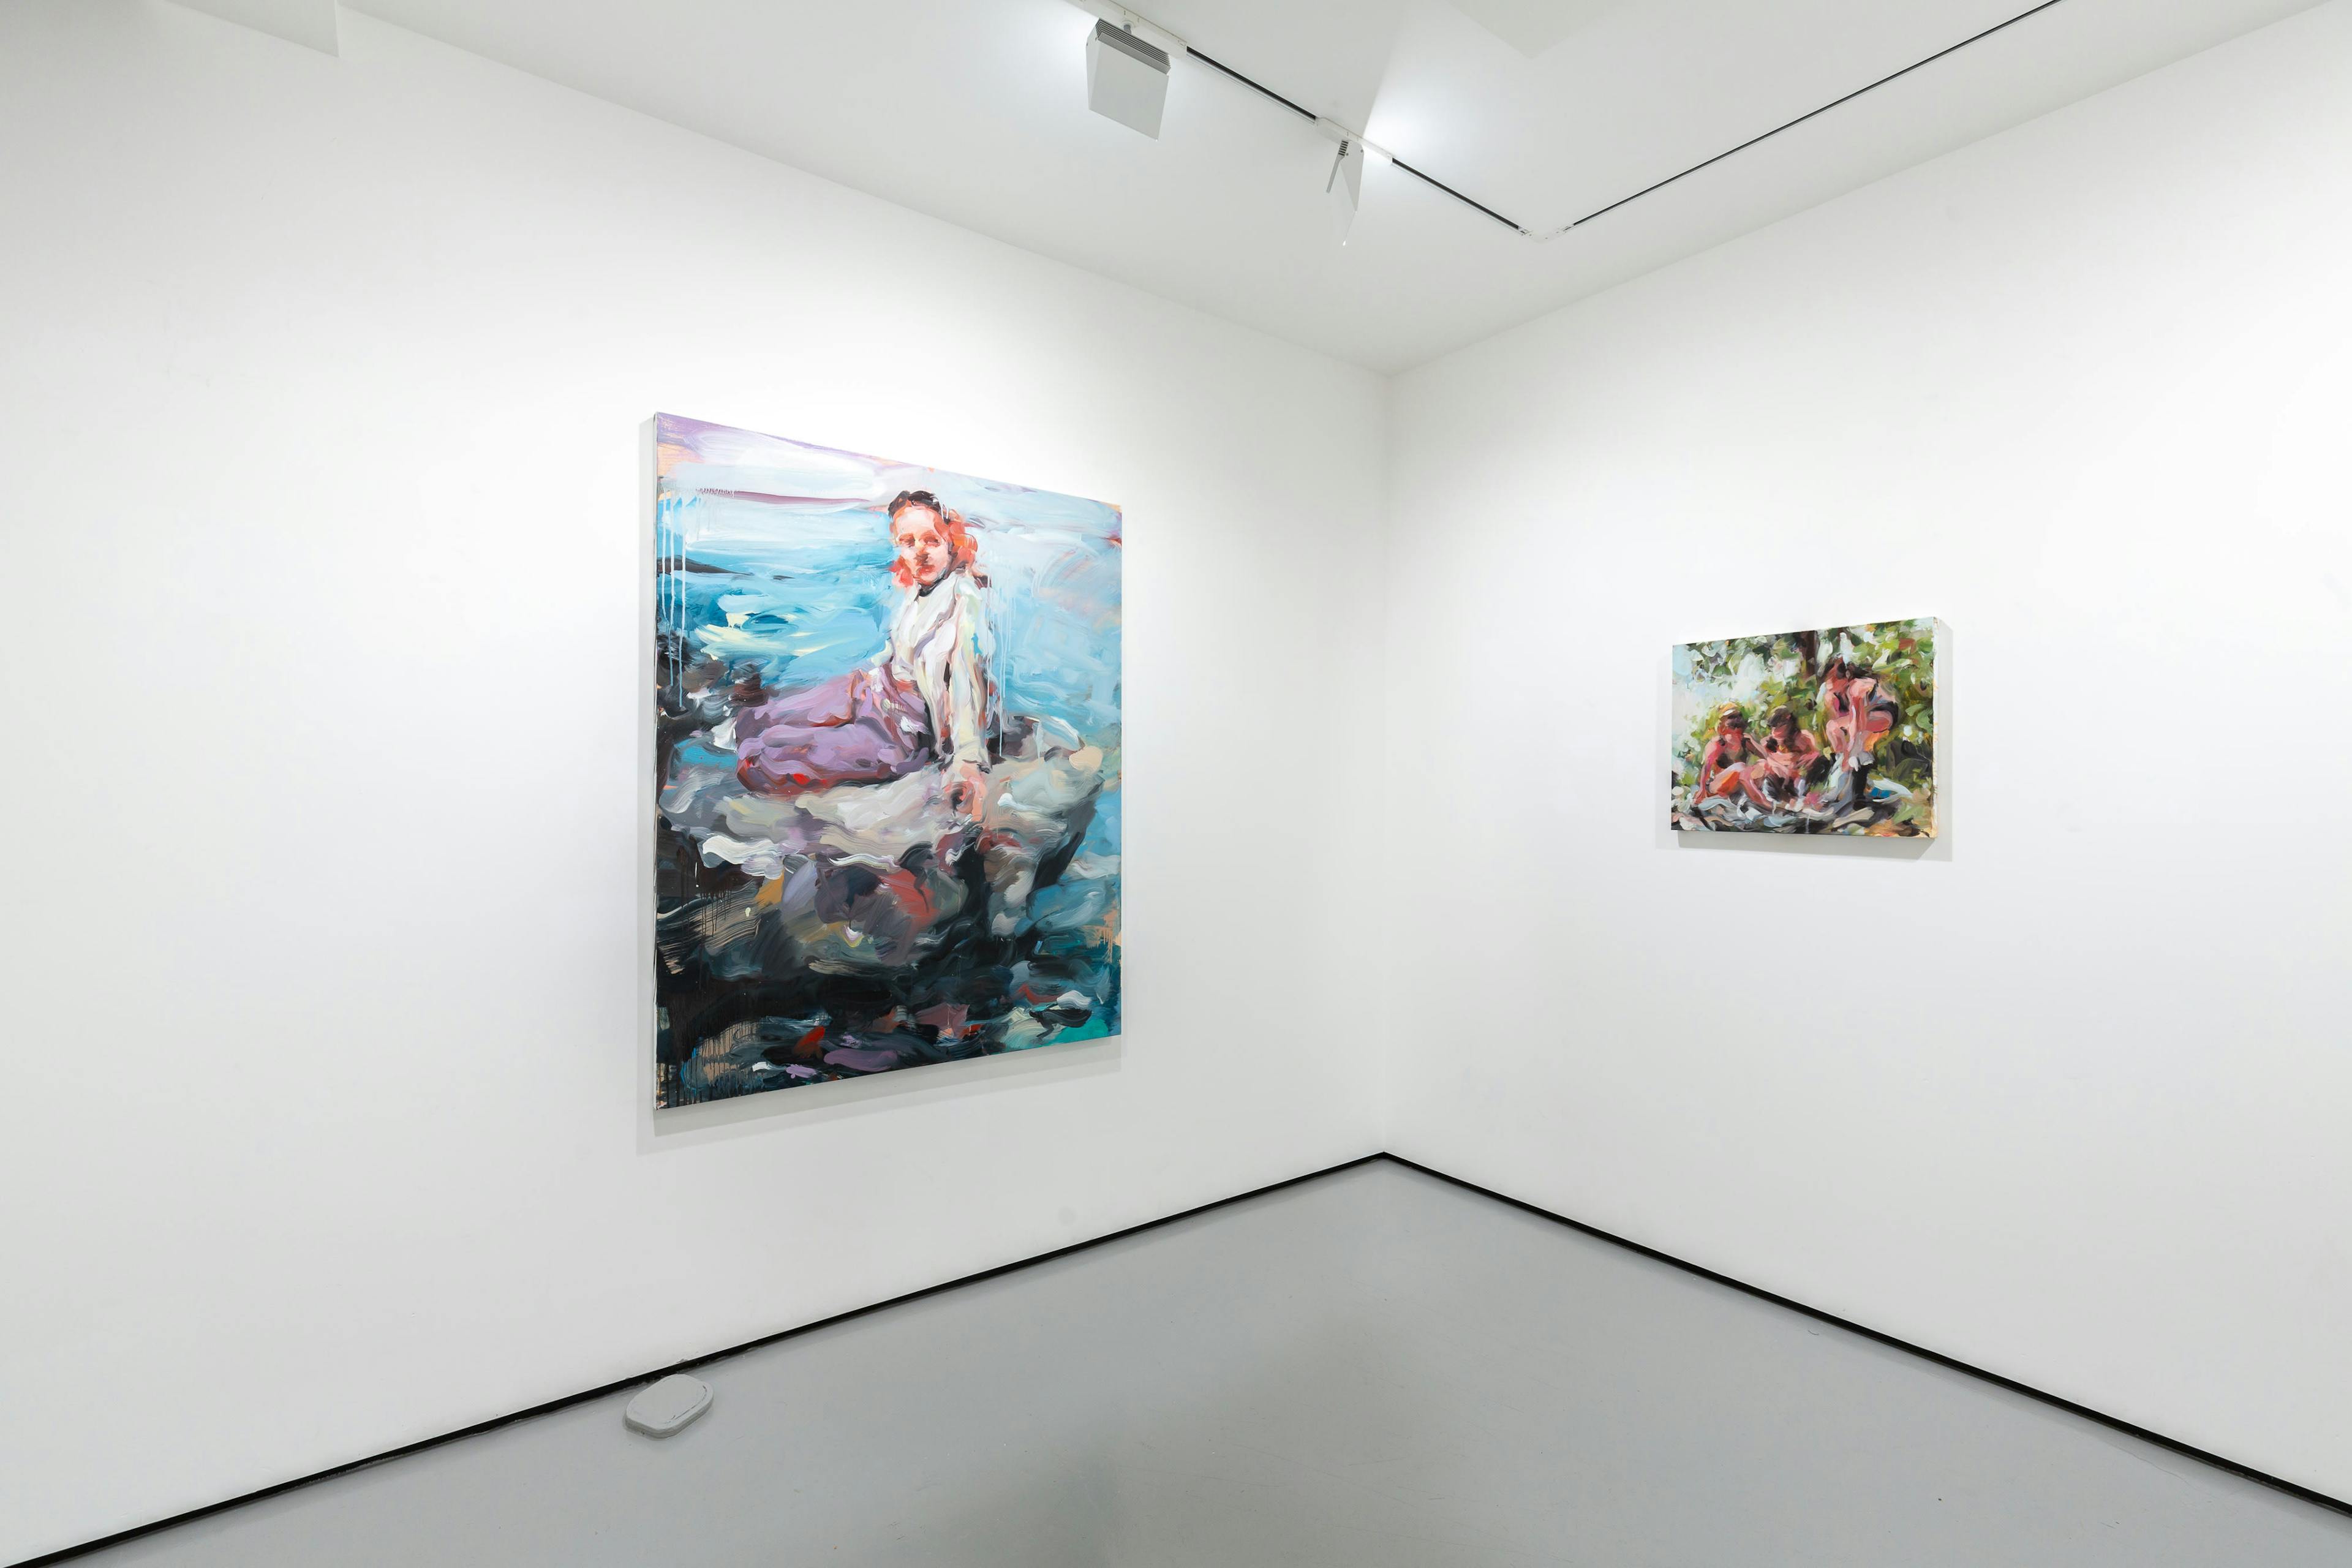 Installation shots of Laura Lancasters solo exhibition 'In Dreams' at Workplace | London